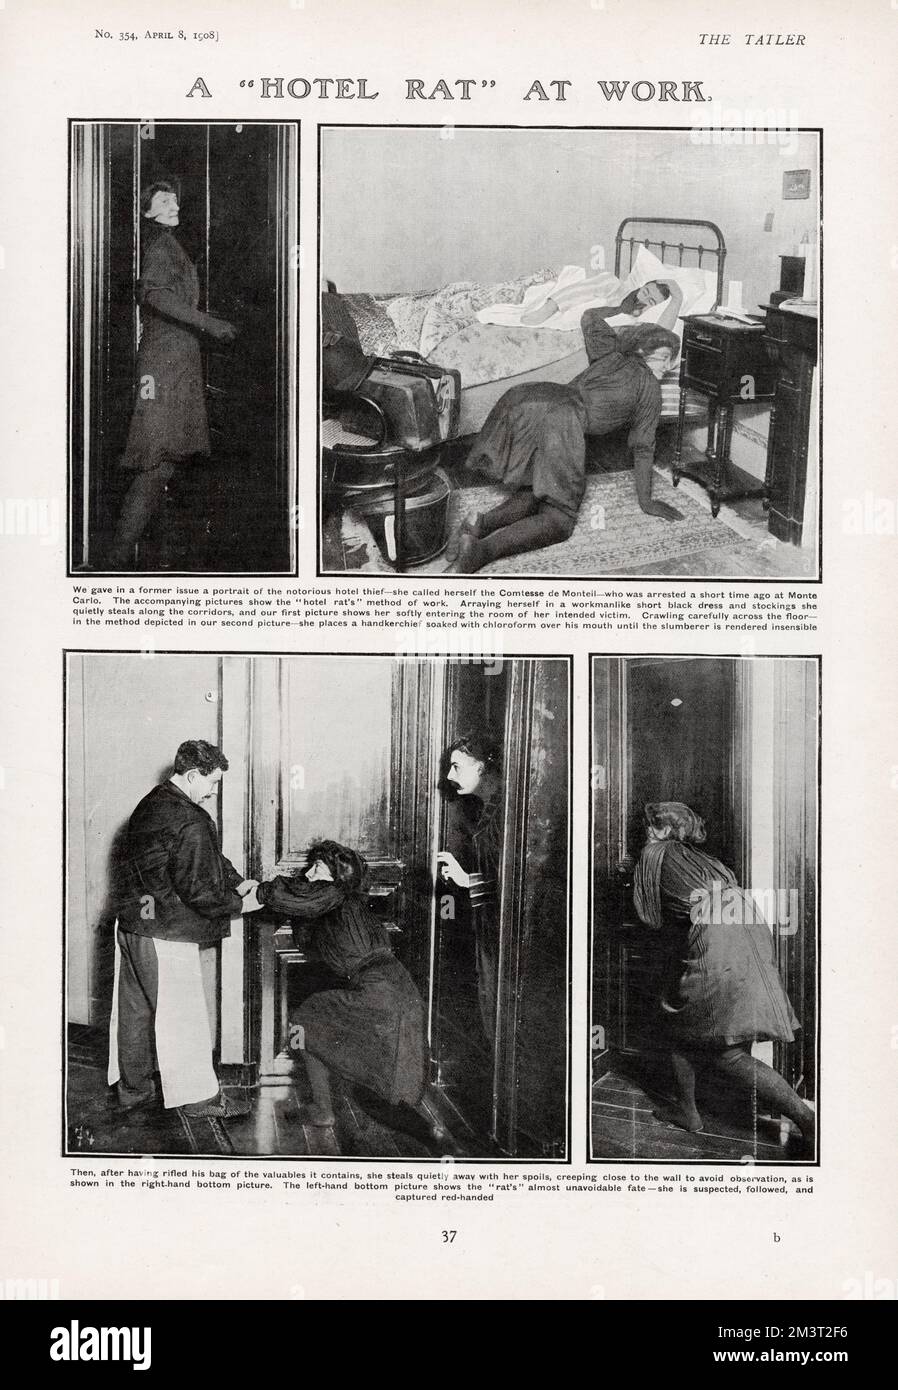 A 'hotel rat' at work. The notorious hotel thief, calling herself the Comtesse de Monteil, who was arrested at Monte Carlo: her method of work. Arraying herself in a workmanlike short black dress, she quietly steals along the corridors and enters the room of her victim. She places a handkerchief soaked with chloroform over the victim's mouth until he is rendered insensible. After having rifled his bag of valuables, she steals quietly away, creeping close to the wall to avoid observation. The bottom left picture shows the 'rat's' fate: she is suspected, followed and captured red-handed.     Dat Stock Photo